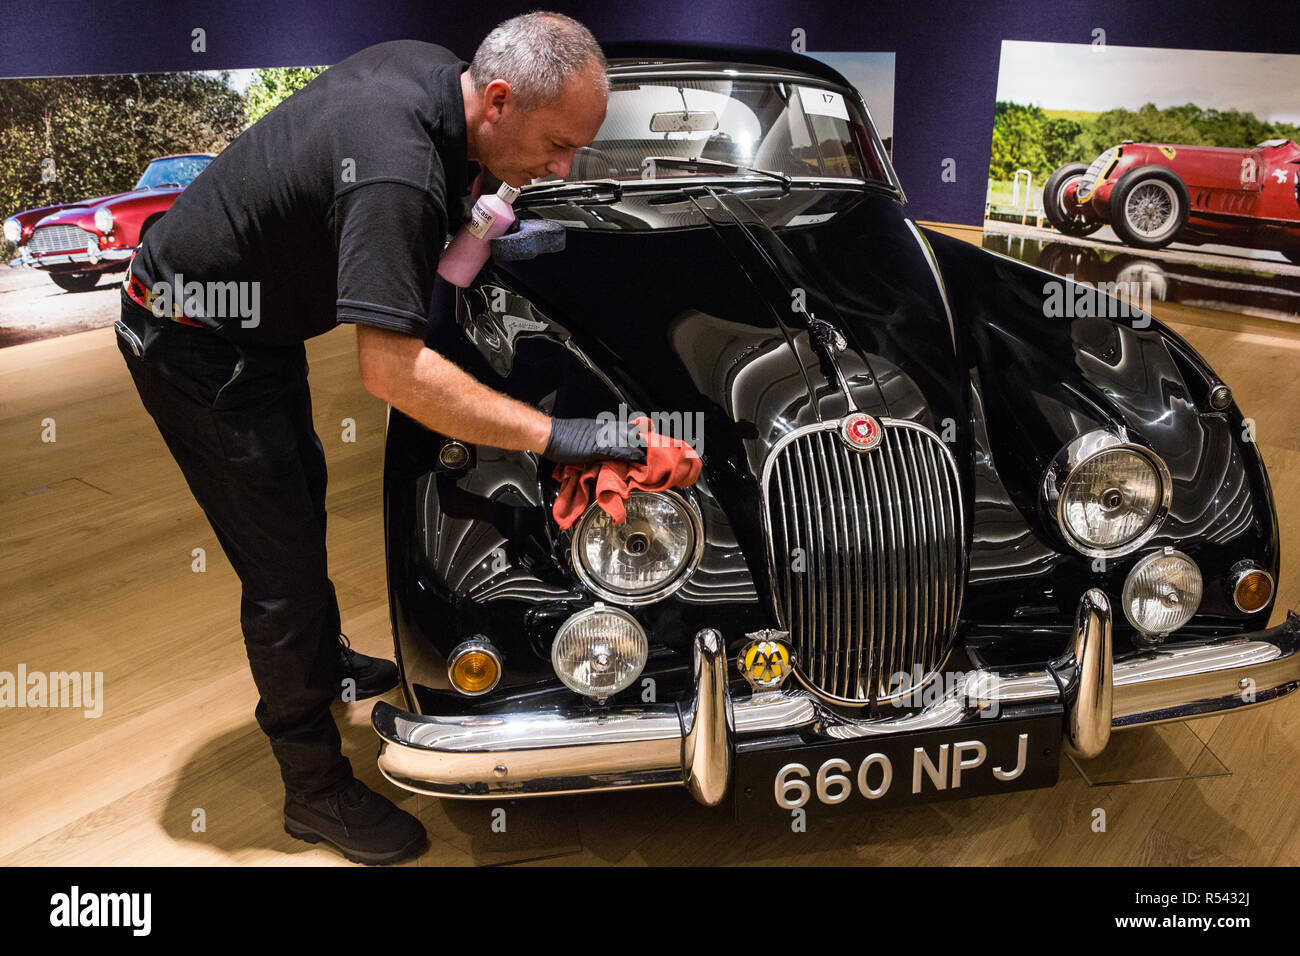 London, UK. 29th November, 2018. Bonhams' staff prepare a 1960 Jaguar XK150 'S' 3.8-Litre Coupé, one of only 115 right-hand drive vehicles made, in preparation for an auction of historic and high-performance racing and road cars. Highlights include a Le Mans class-winning Jaguar XJ220C driven by David Coulthard (£2,200,000-2,800,000), a Lister Jaguar Knobbly (£2,200,000-2,800,000) and a 1958 BMW 507 owned by its designer, as well as Ferraris, Aston Martins, Bentleys, Porsches and Jaguars. Credit: Mark Kerrison/Alamy Live News Stock Photo